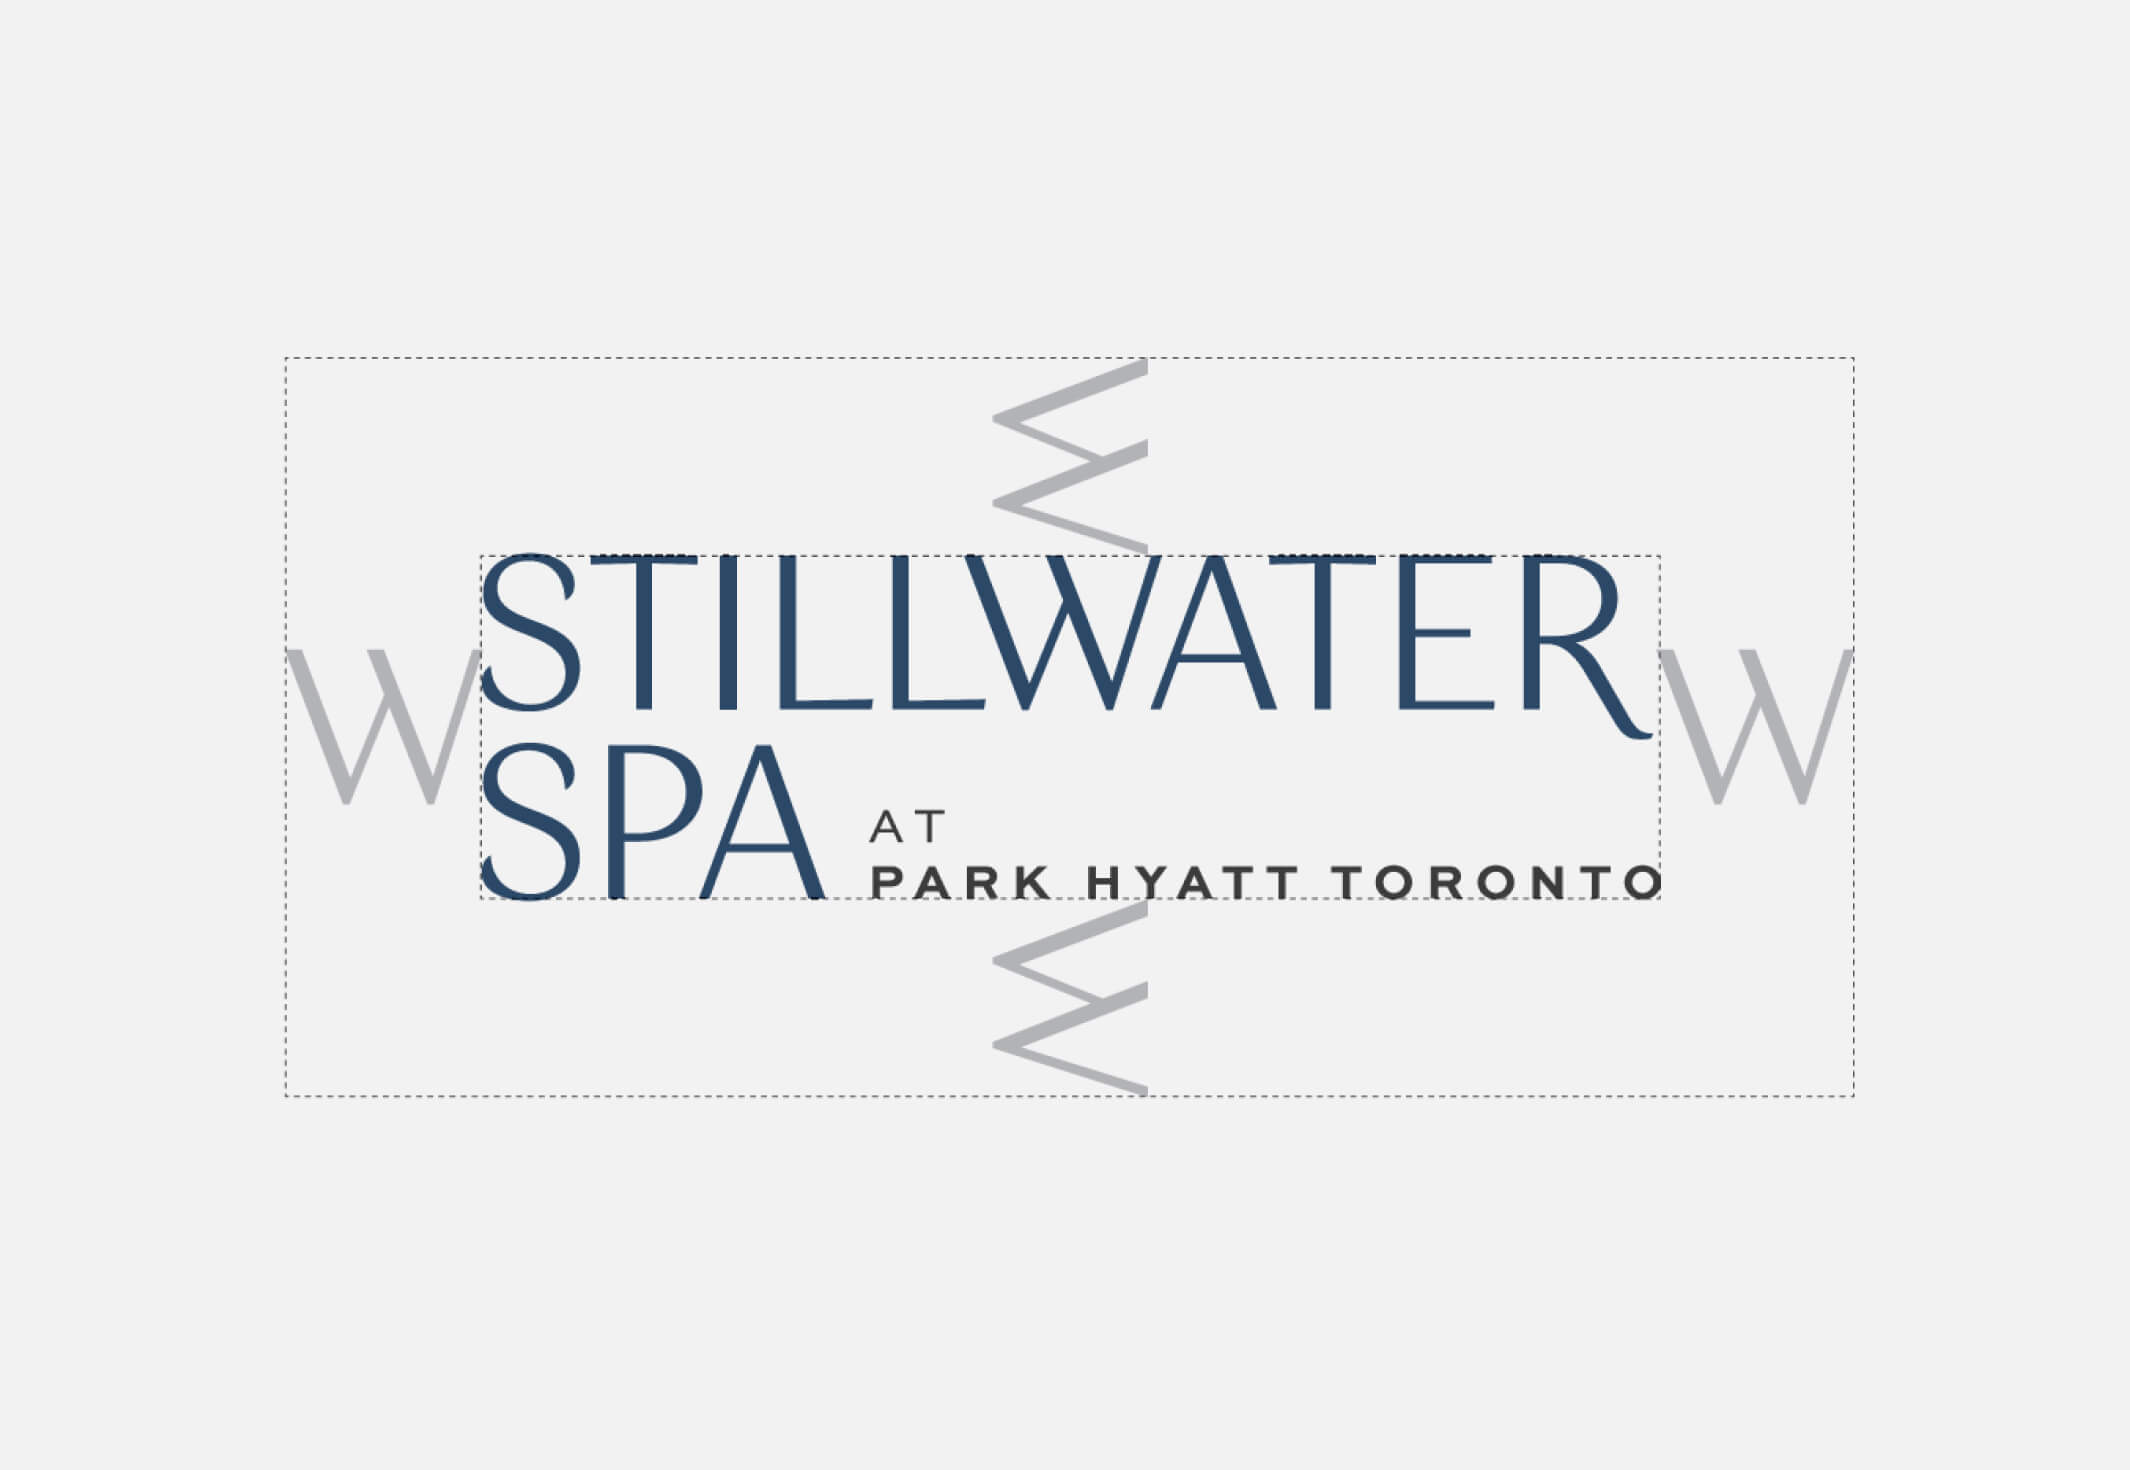 An image showing the safe space around the Stillwater Spa logo